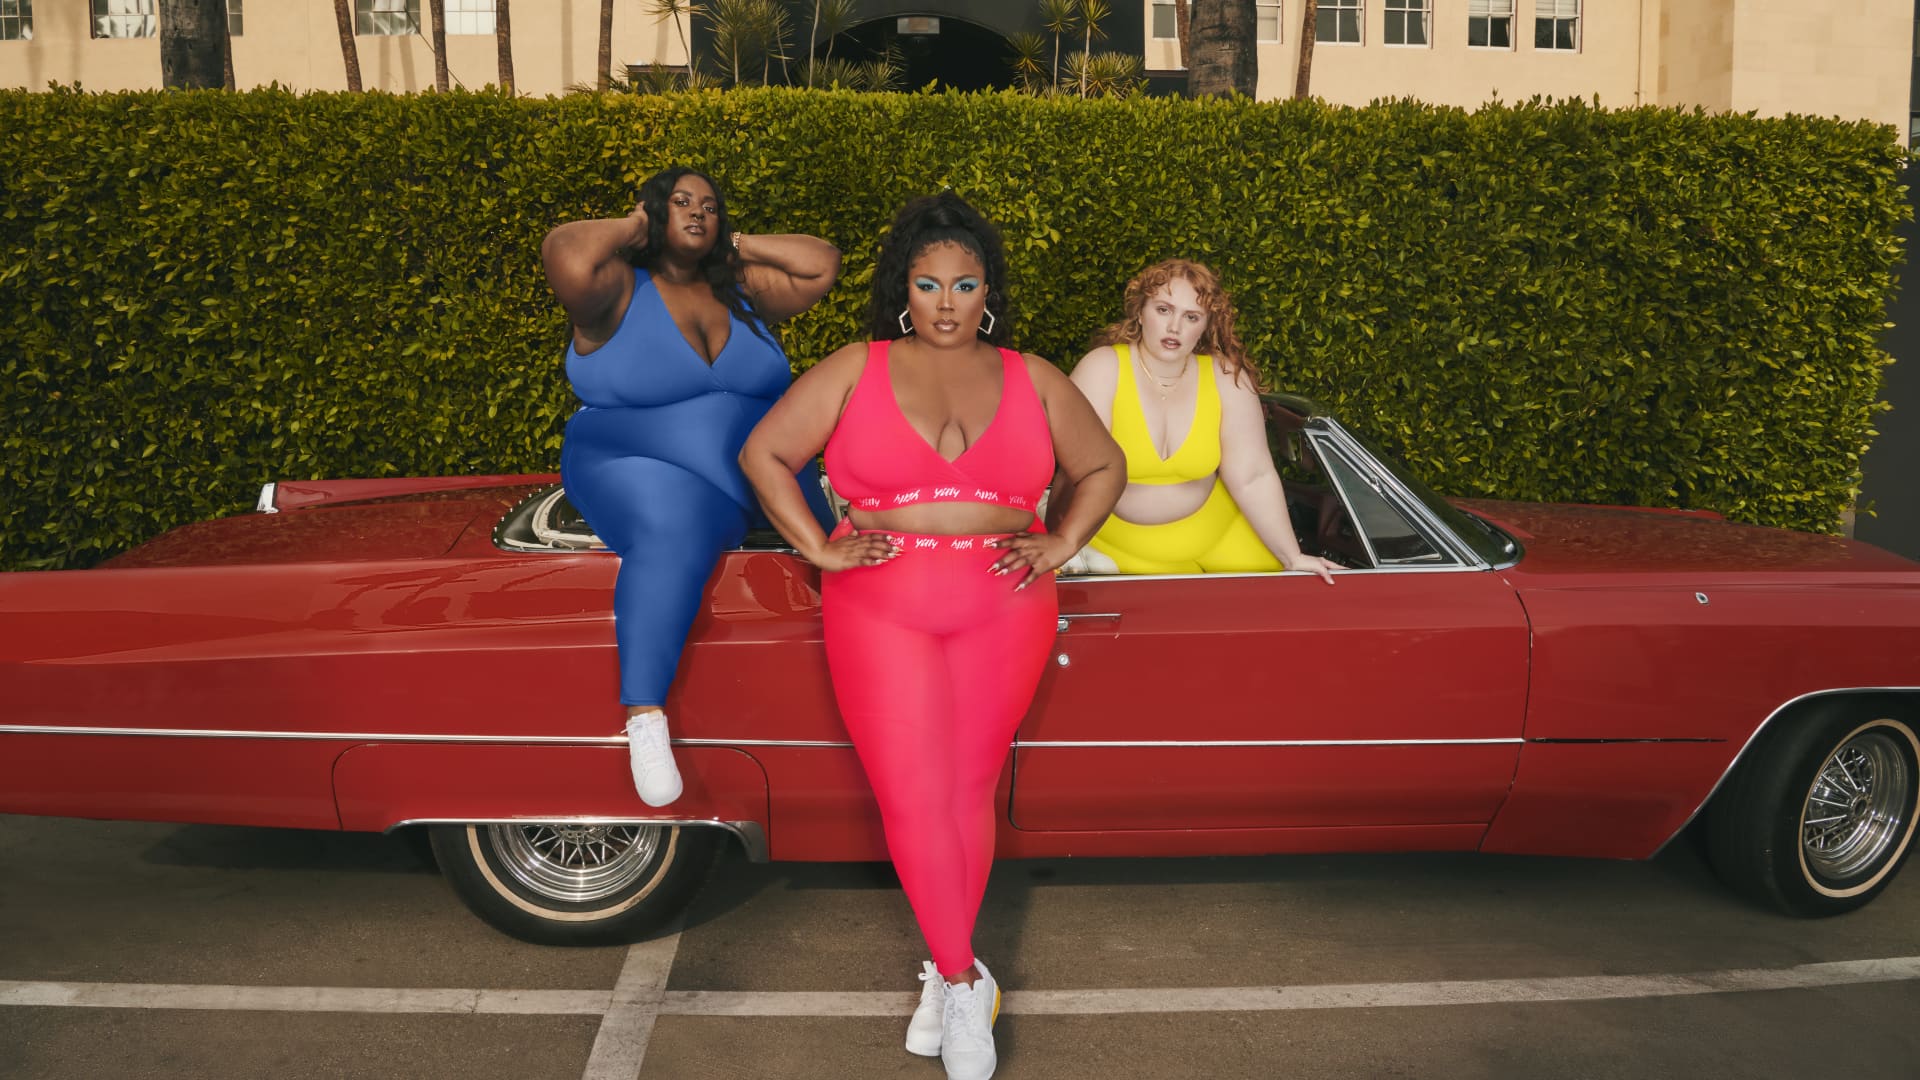 Bold design and body positivity: Superstar Lizzo previews her new line of Fabletics shapewear